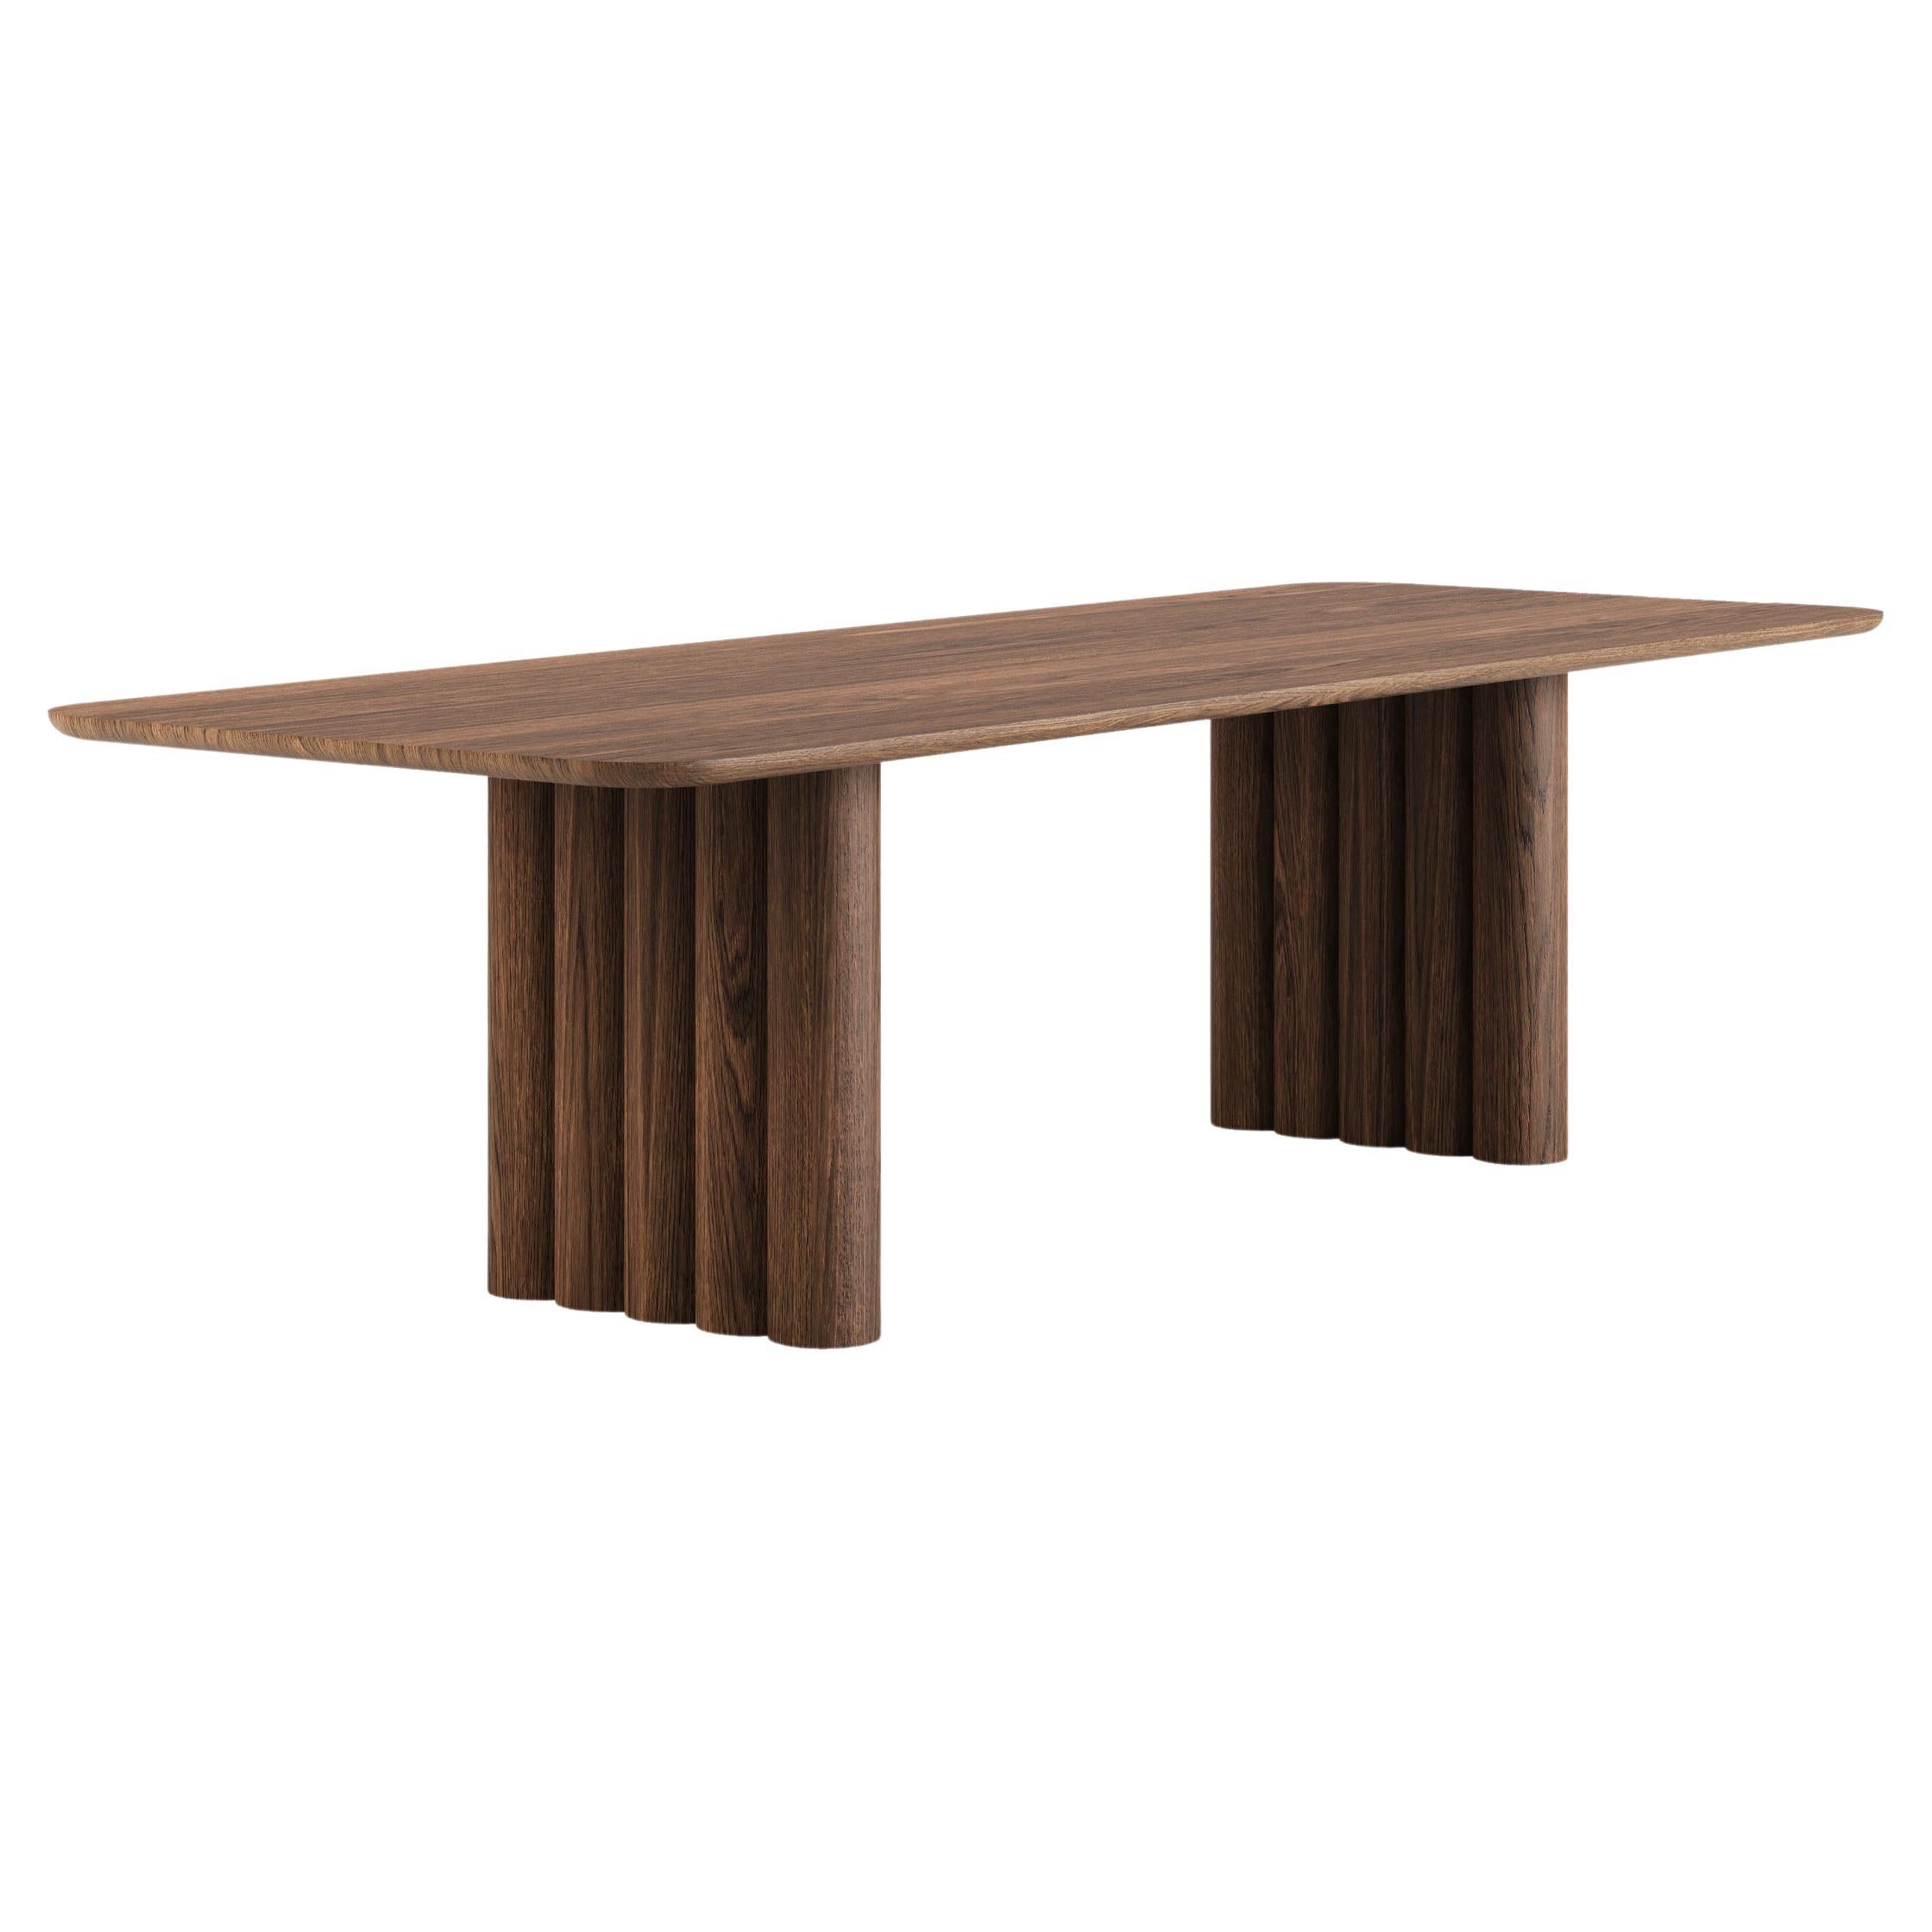 Contemporary Dining Table 'Plush' by Dk3, Smoked Oak or Walnut, 270, Rectangular For Sale